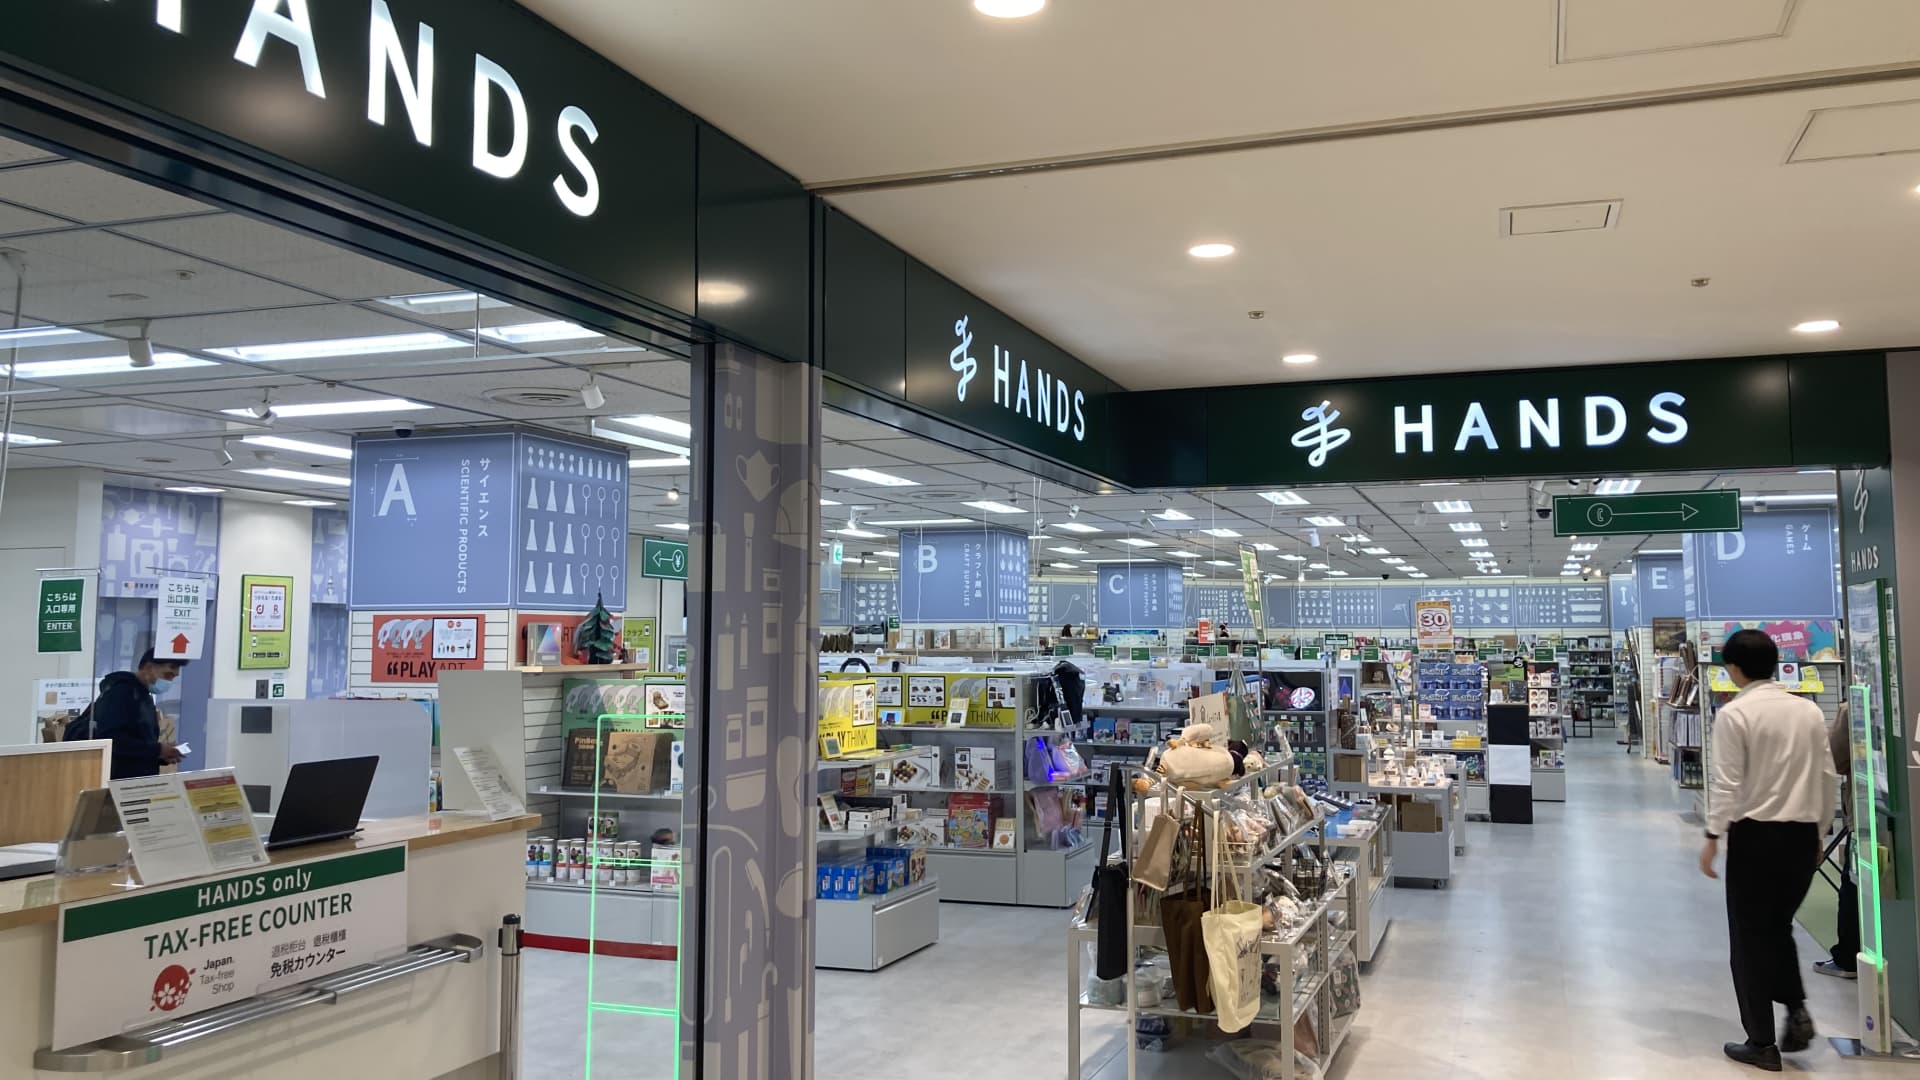 Tokyu Hands, which has been rebranded to Hands, is famous for selling themed household and beauty novelty items.